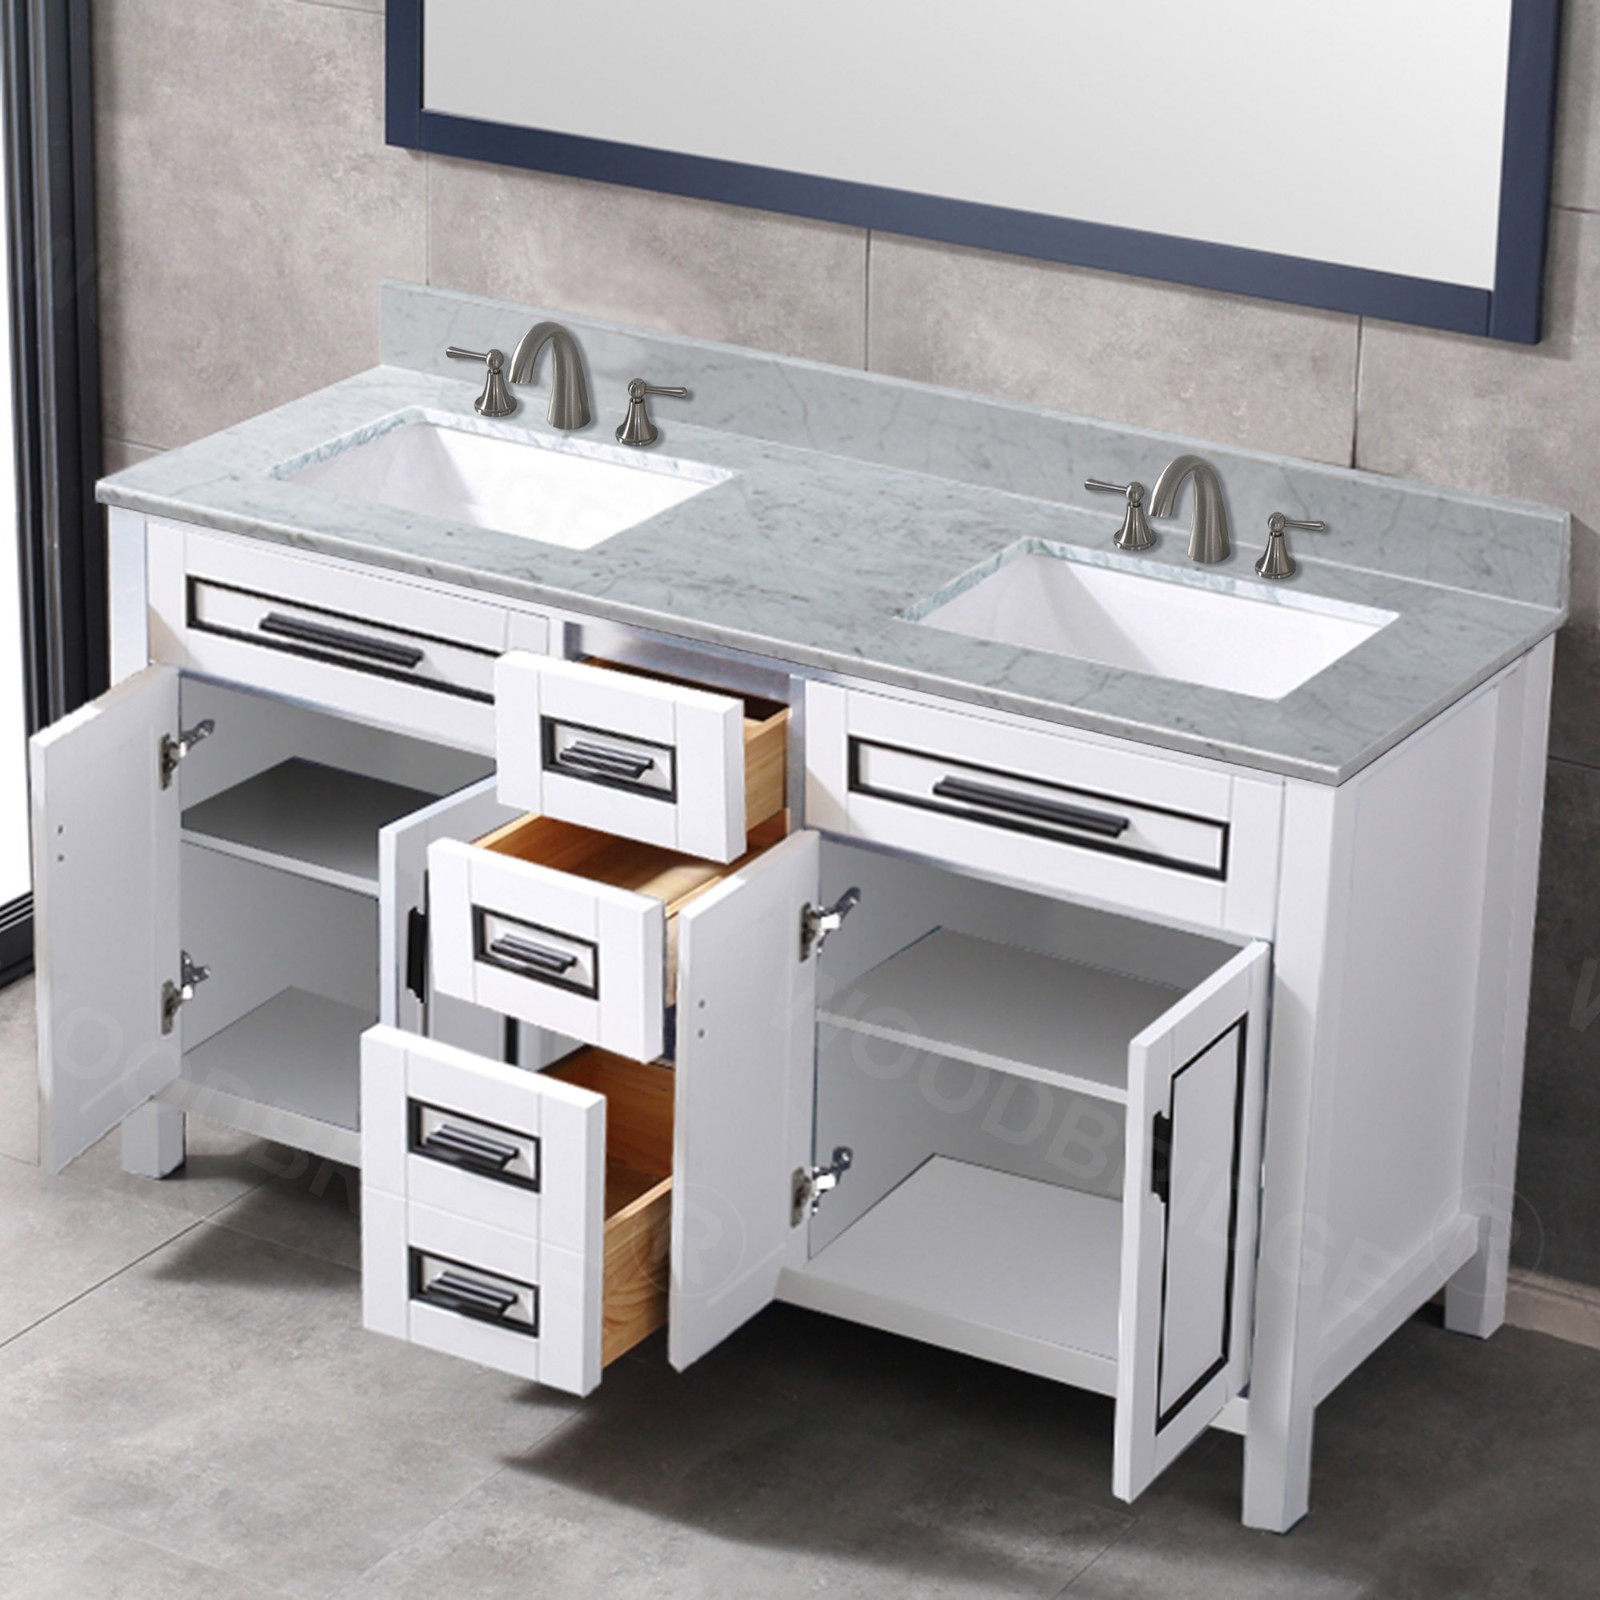  WOODBRIDGE Milan  61” Floor Mounted Single Basin Vanity Set with Solid Wood Cabinet in White, and Carrara White Marble Vanity Top with Pre-installed Undermount Rectangle Bathroom Sink in White, Pre-Drilled 3-Hole for 4-inch Centerset Faucet_4617